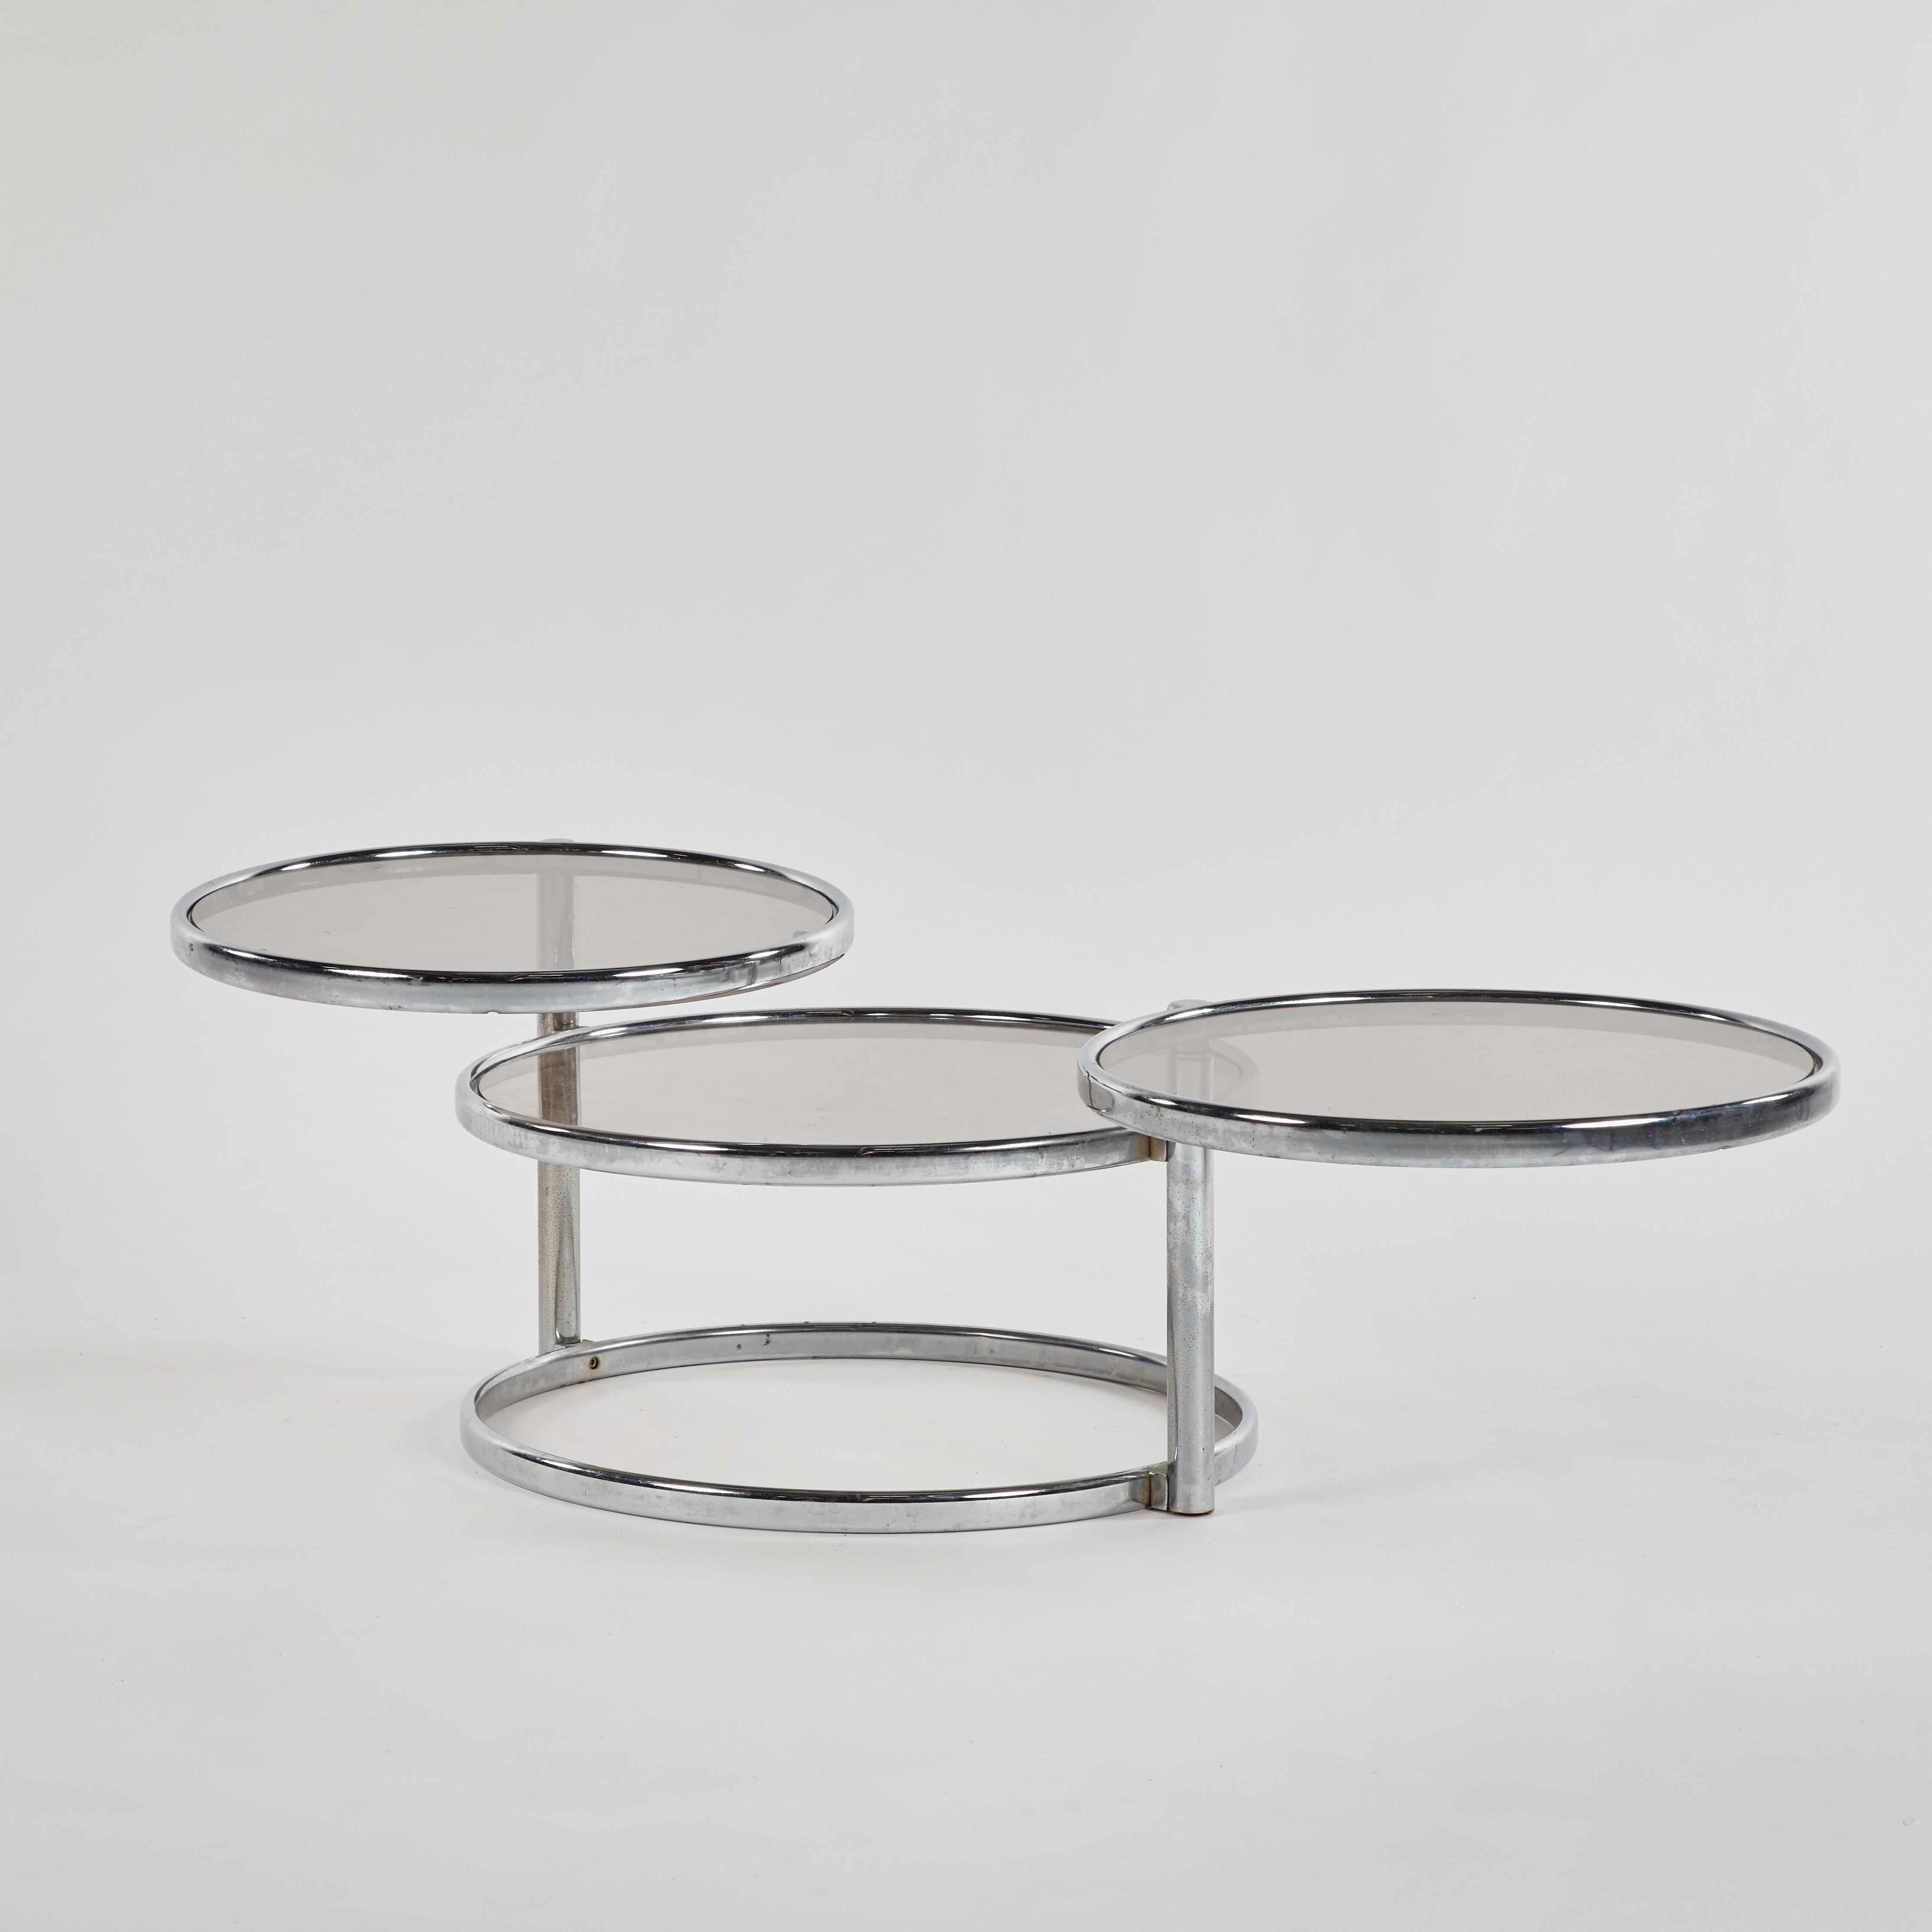 French Mid-Century Modern 1960s round glass top extending table. The different table surfaces rotate to extend outwards. 